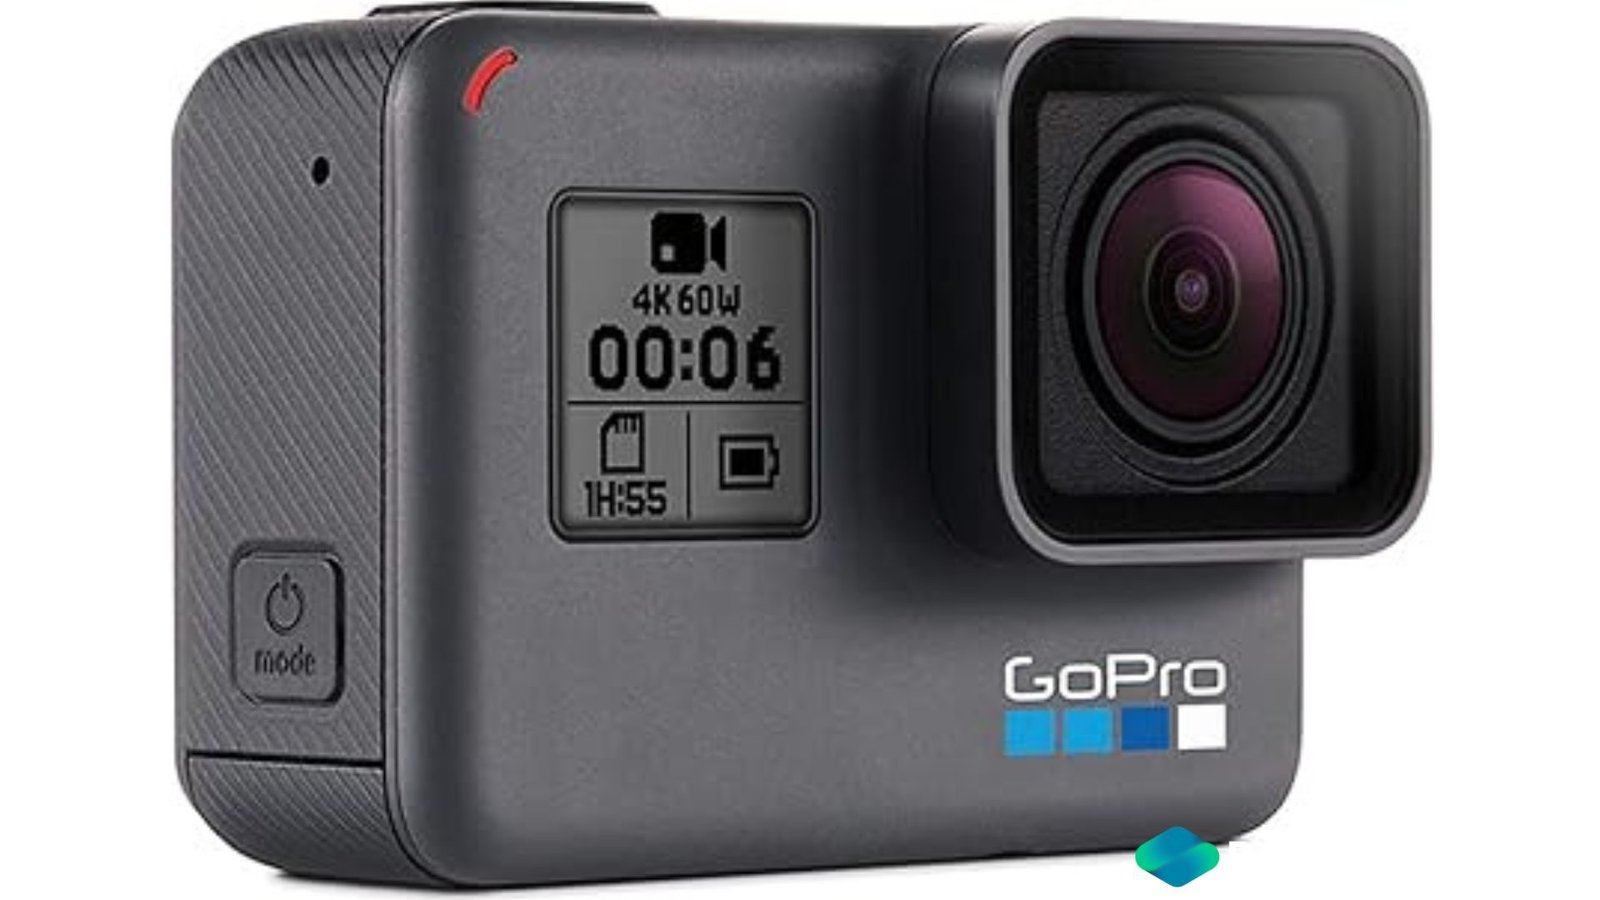 Rent GoPro Hero 6 Camera With All Accessories in Delhi NCR, Camera accessories, Camera lenses for rent, in Delhi Gurgaon Noida, hire Shooting equipment, Lighting equipment rental, Film gear rental for Video production, camera rental company in Delhi, film equipment rental company